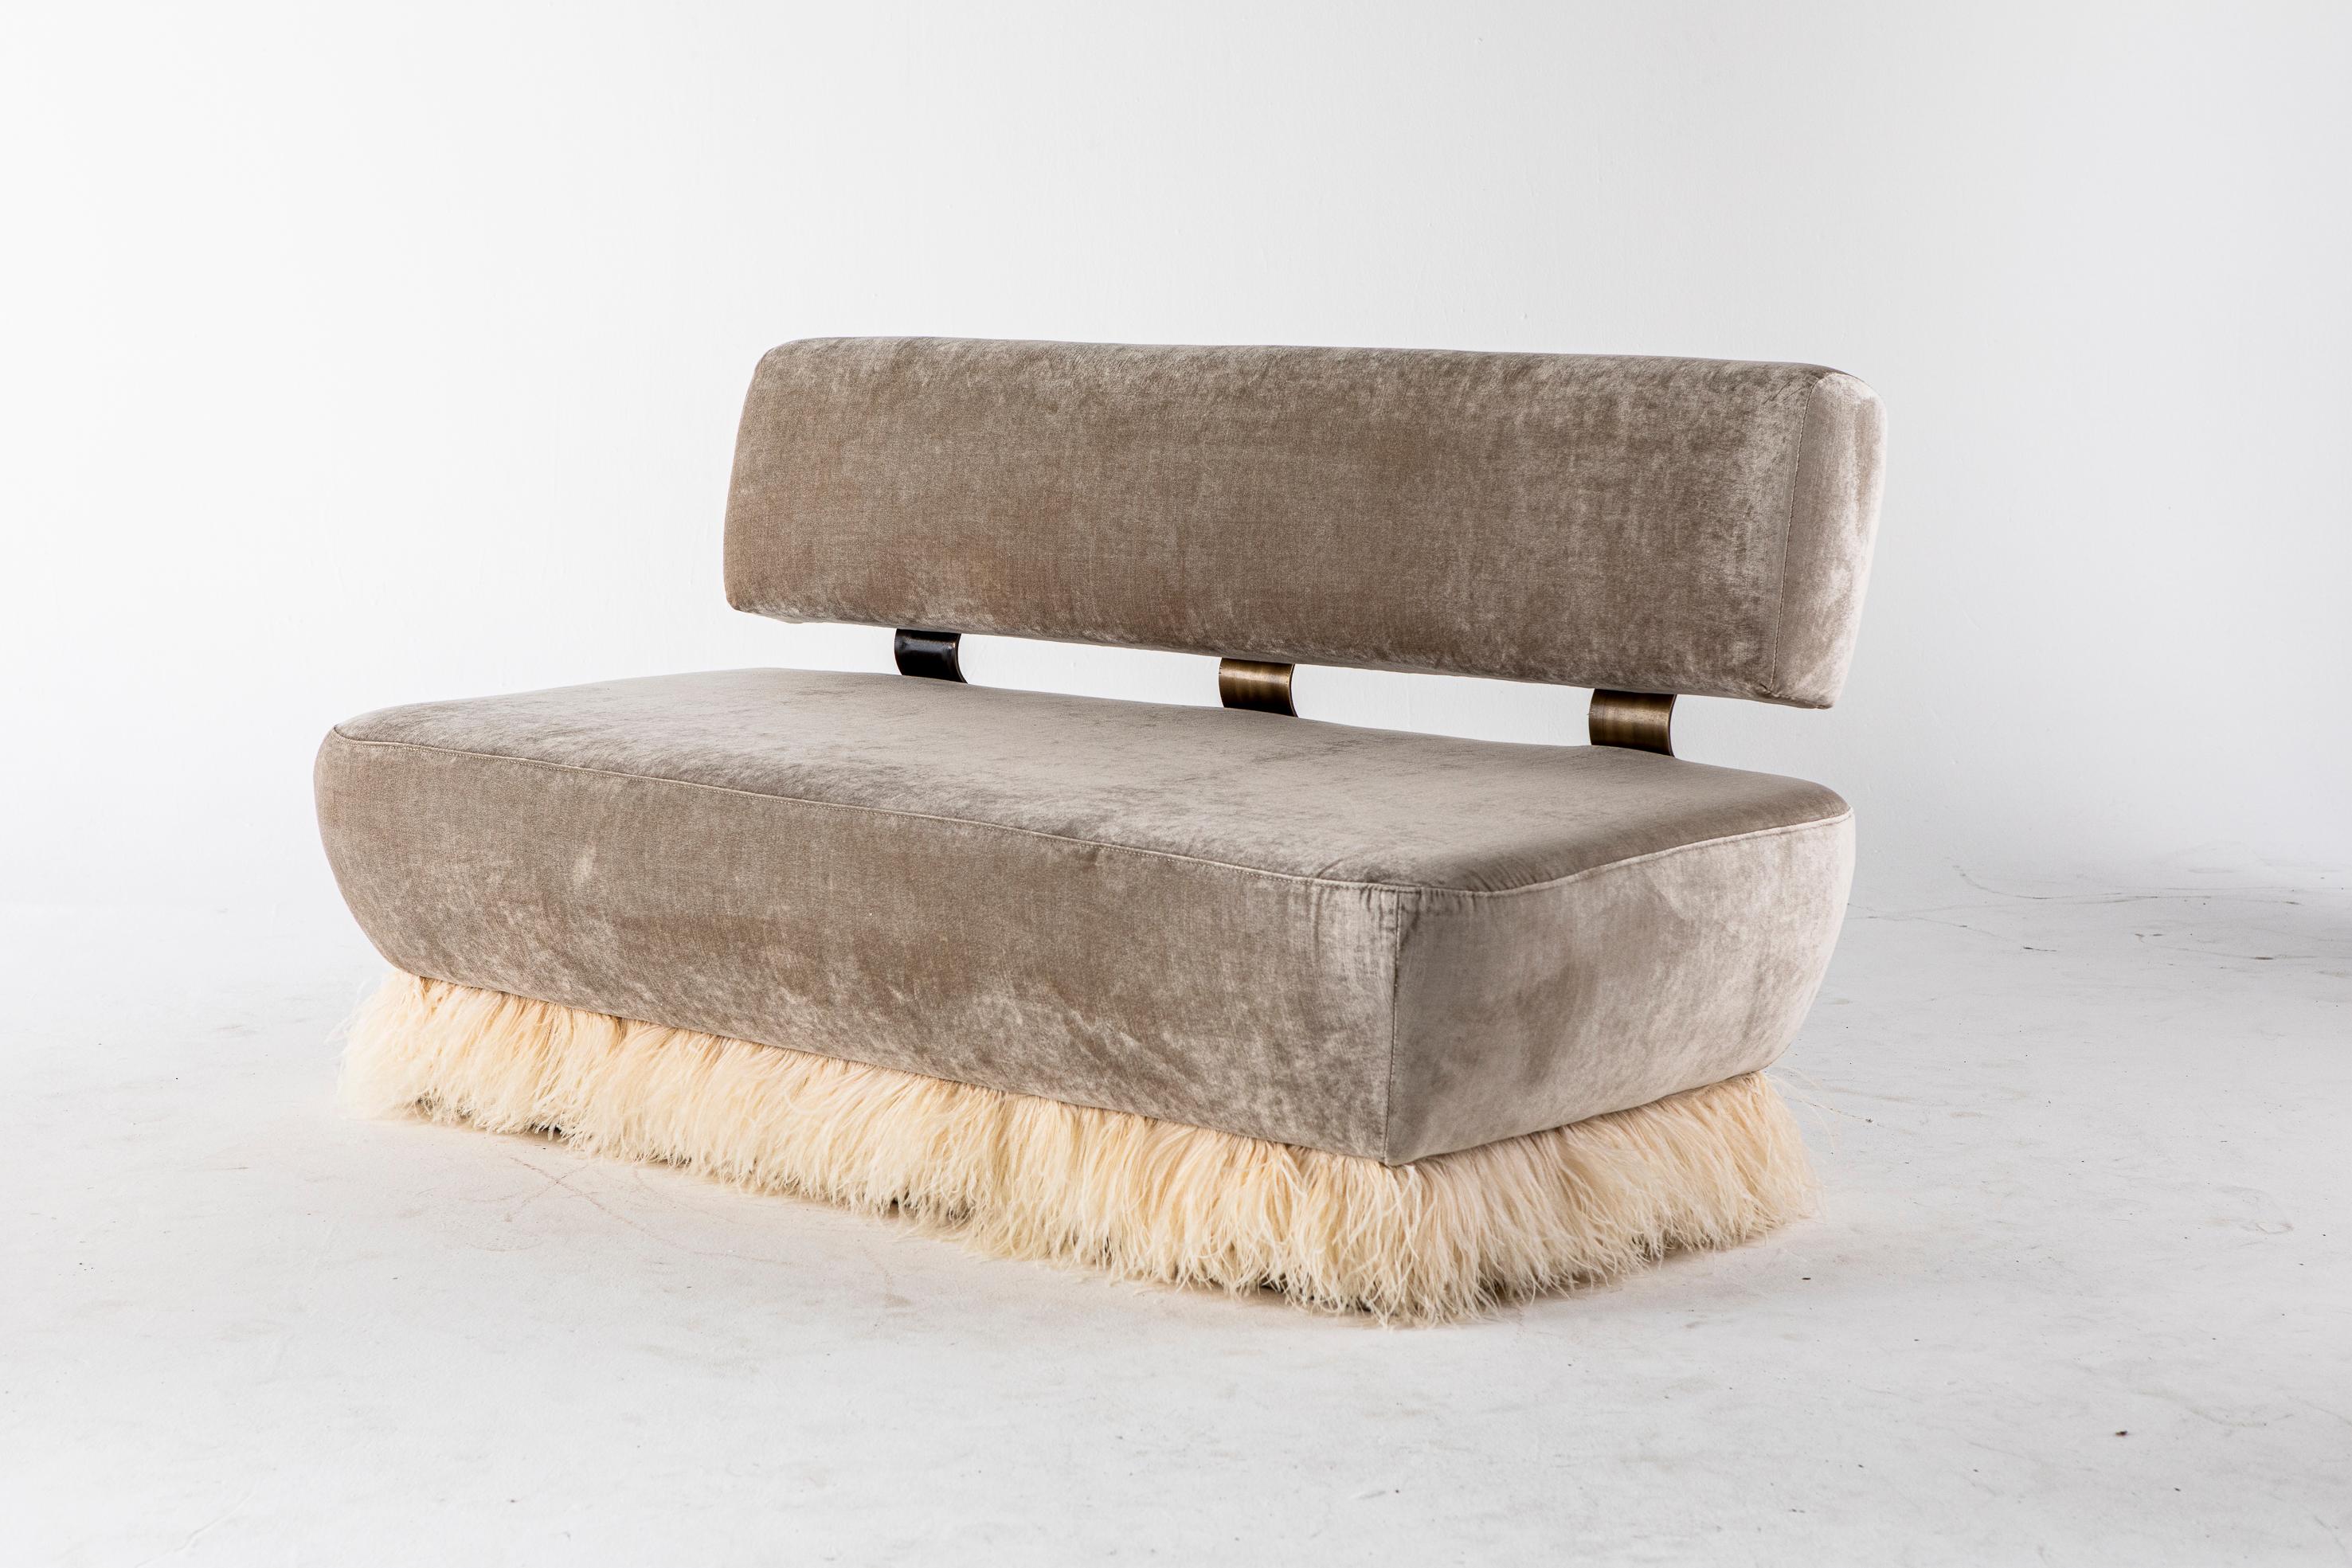 Ostrich fluff sofa by Egg Designs.
Dimensions: 160 L X 79 D X 85 H
Materials: antique brass coated steel, brass buttons, ostrich feather trim, velvet upholstery.

Founded by South Africans and life partners, Greg and Roche Dry - Egg is a unique